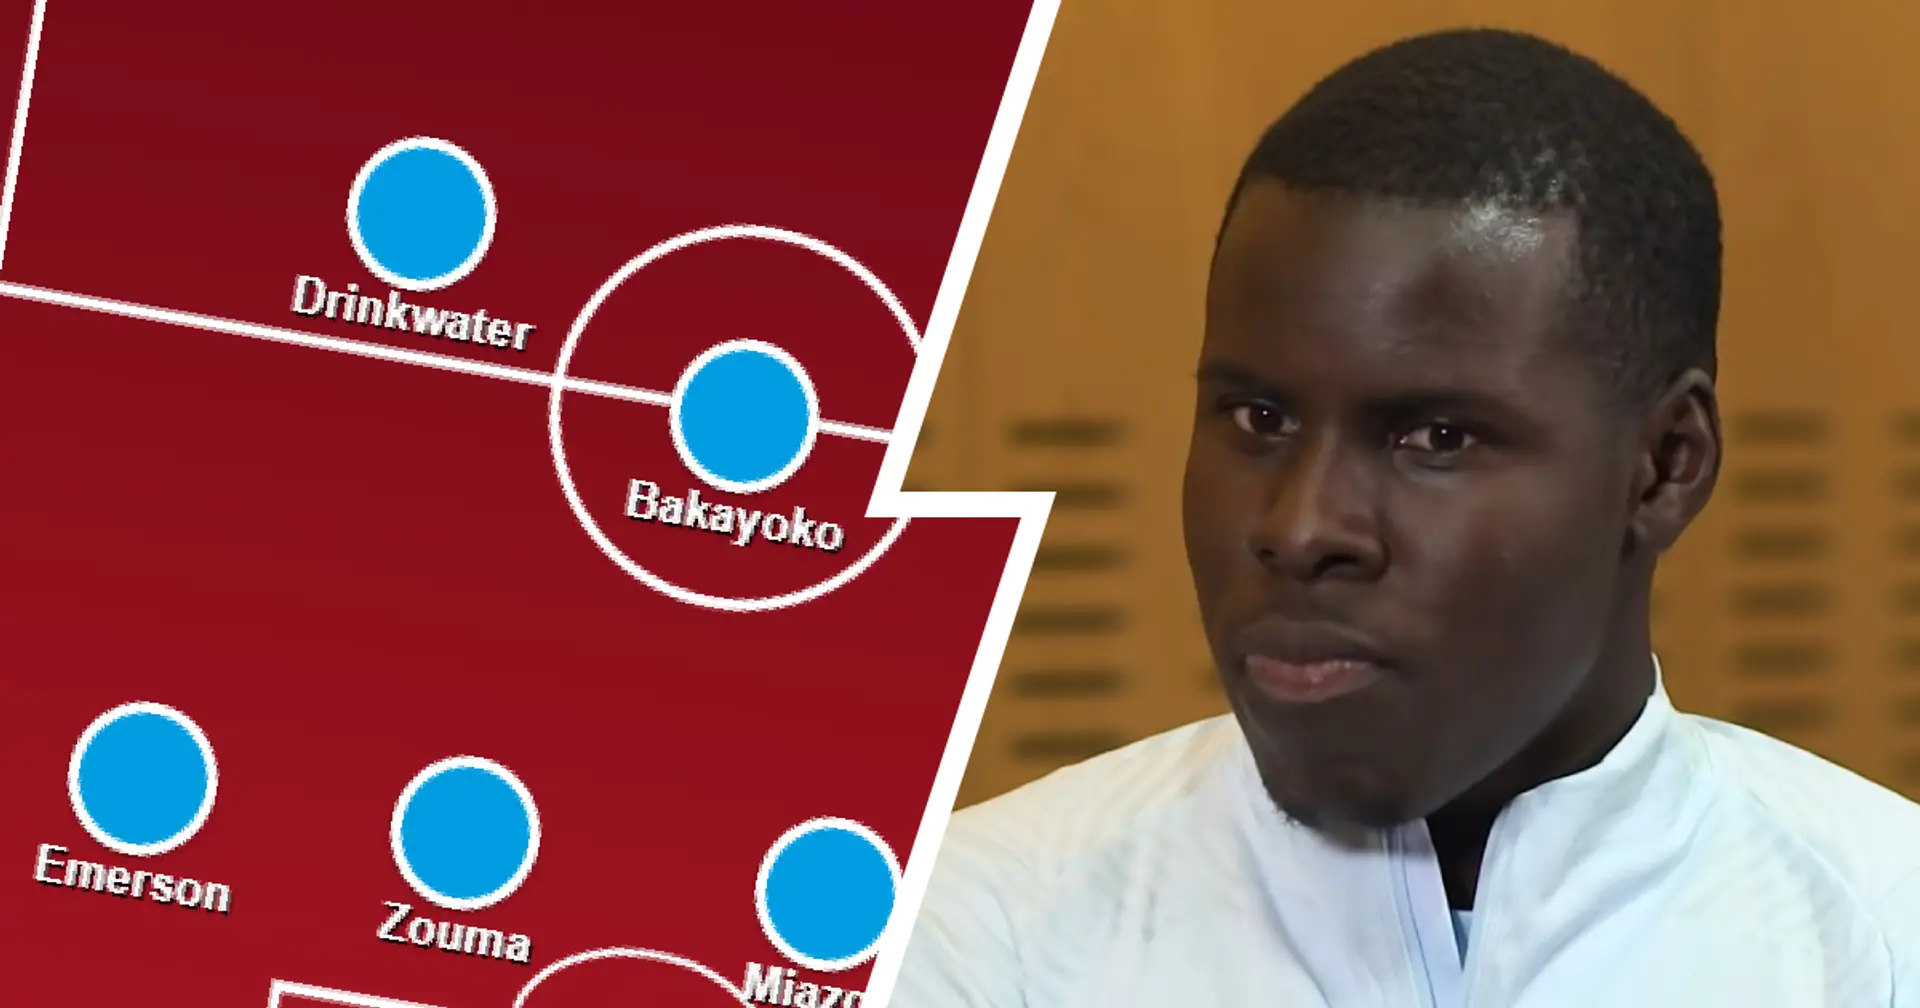 Zouma, Bakayoko & more: Chelsea's unwanted players XI is better than many Prem sides